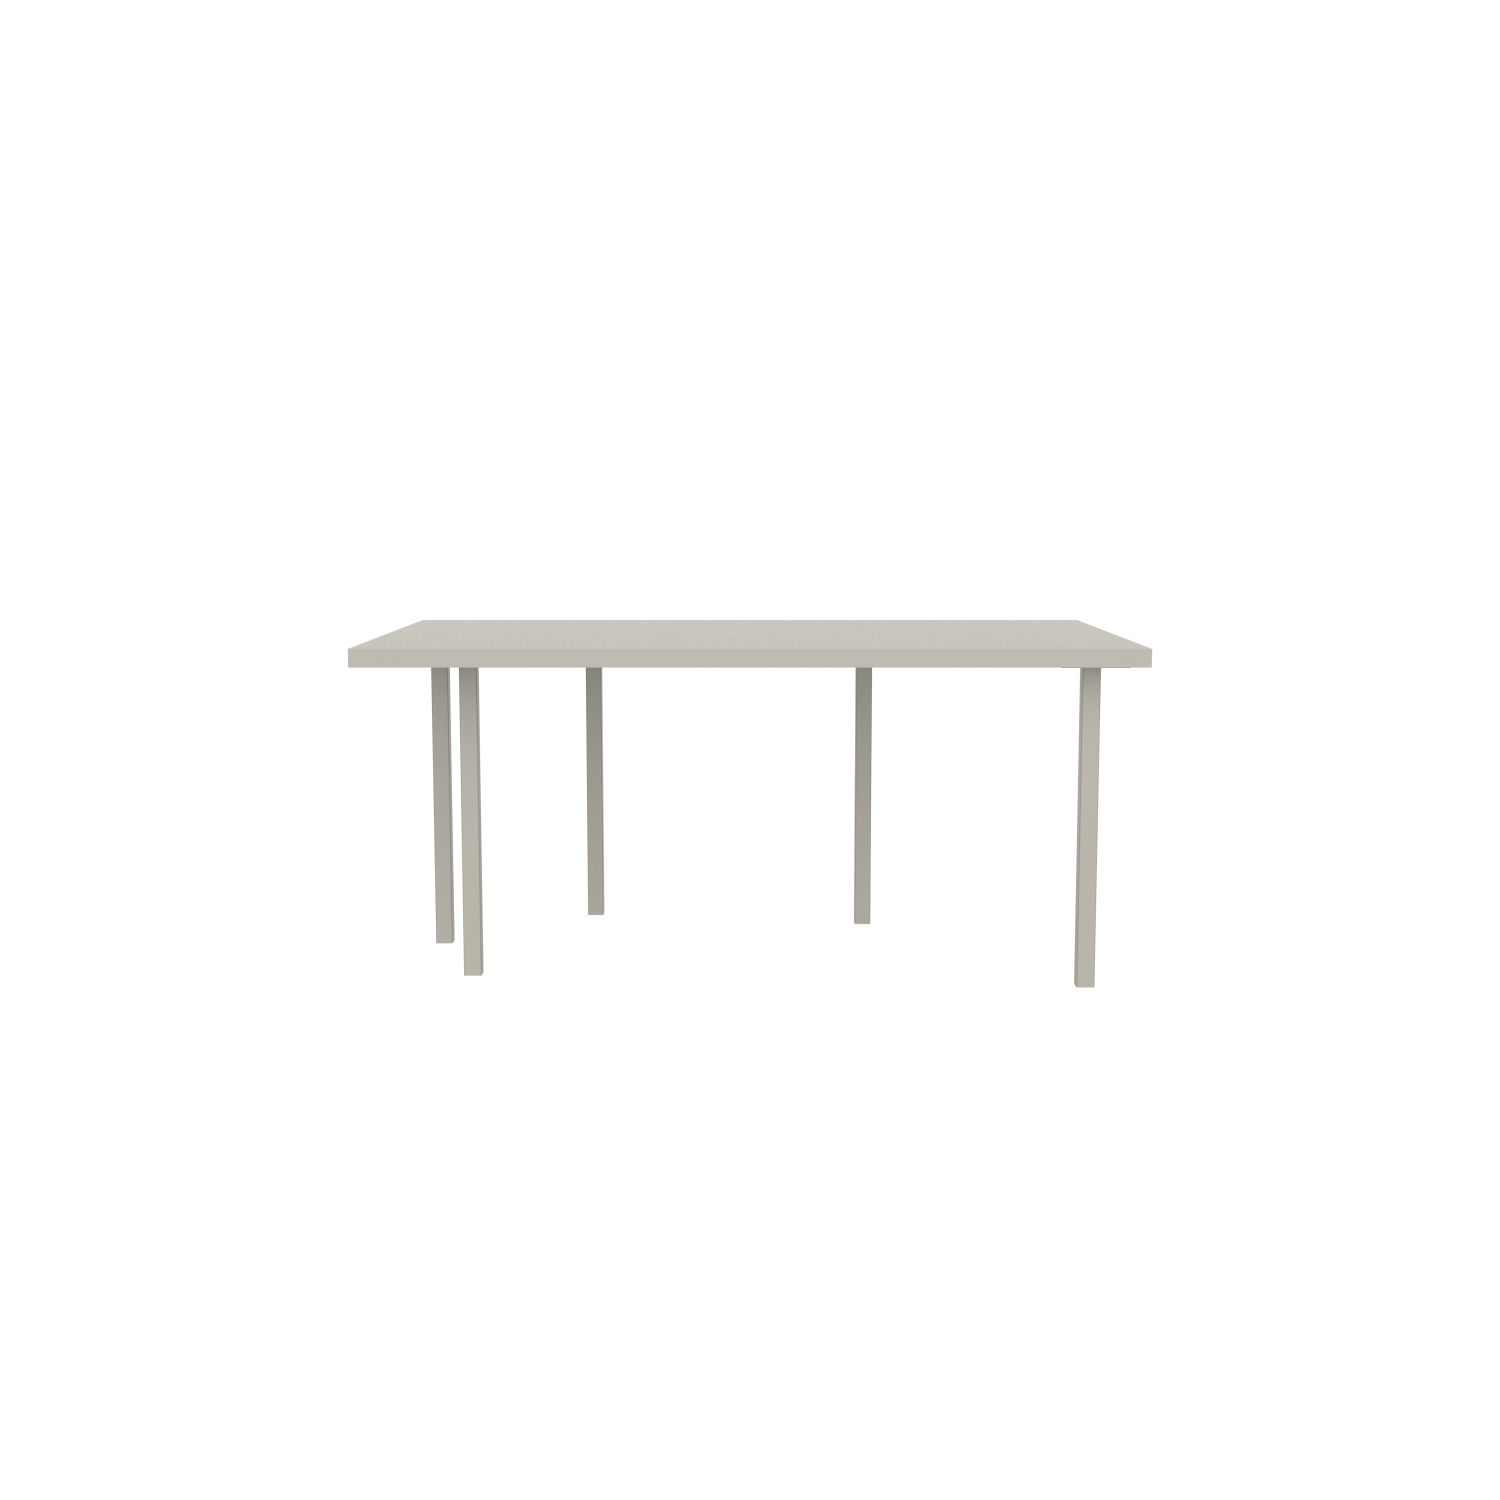 lensvelt bbrand table five fixed heigt 103x172 hpl white 50 mm price level 1 boring grey ral7044